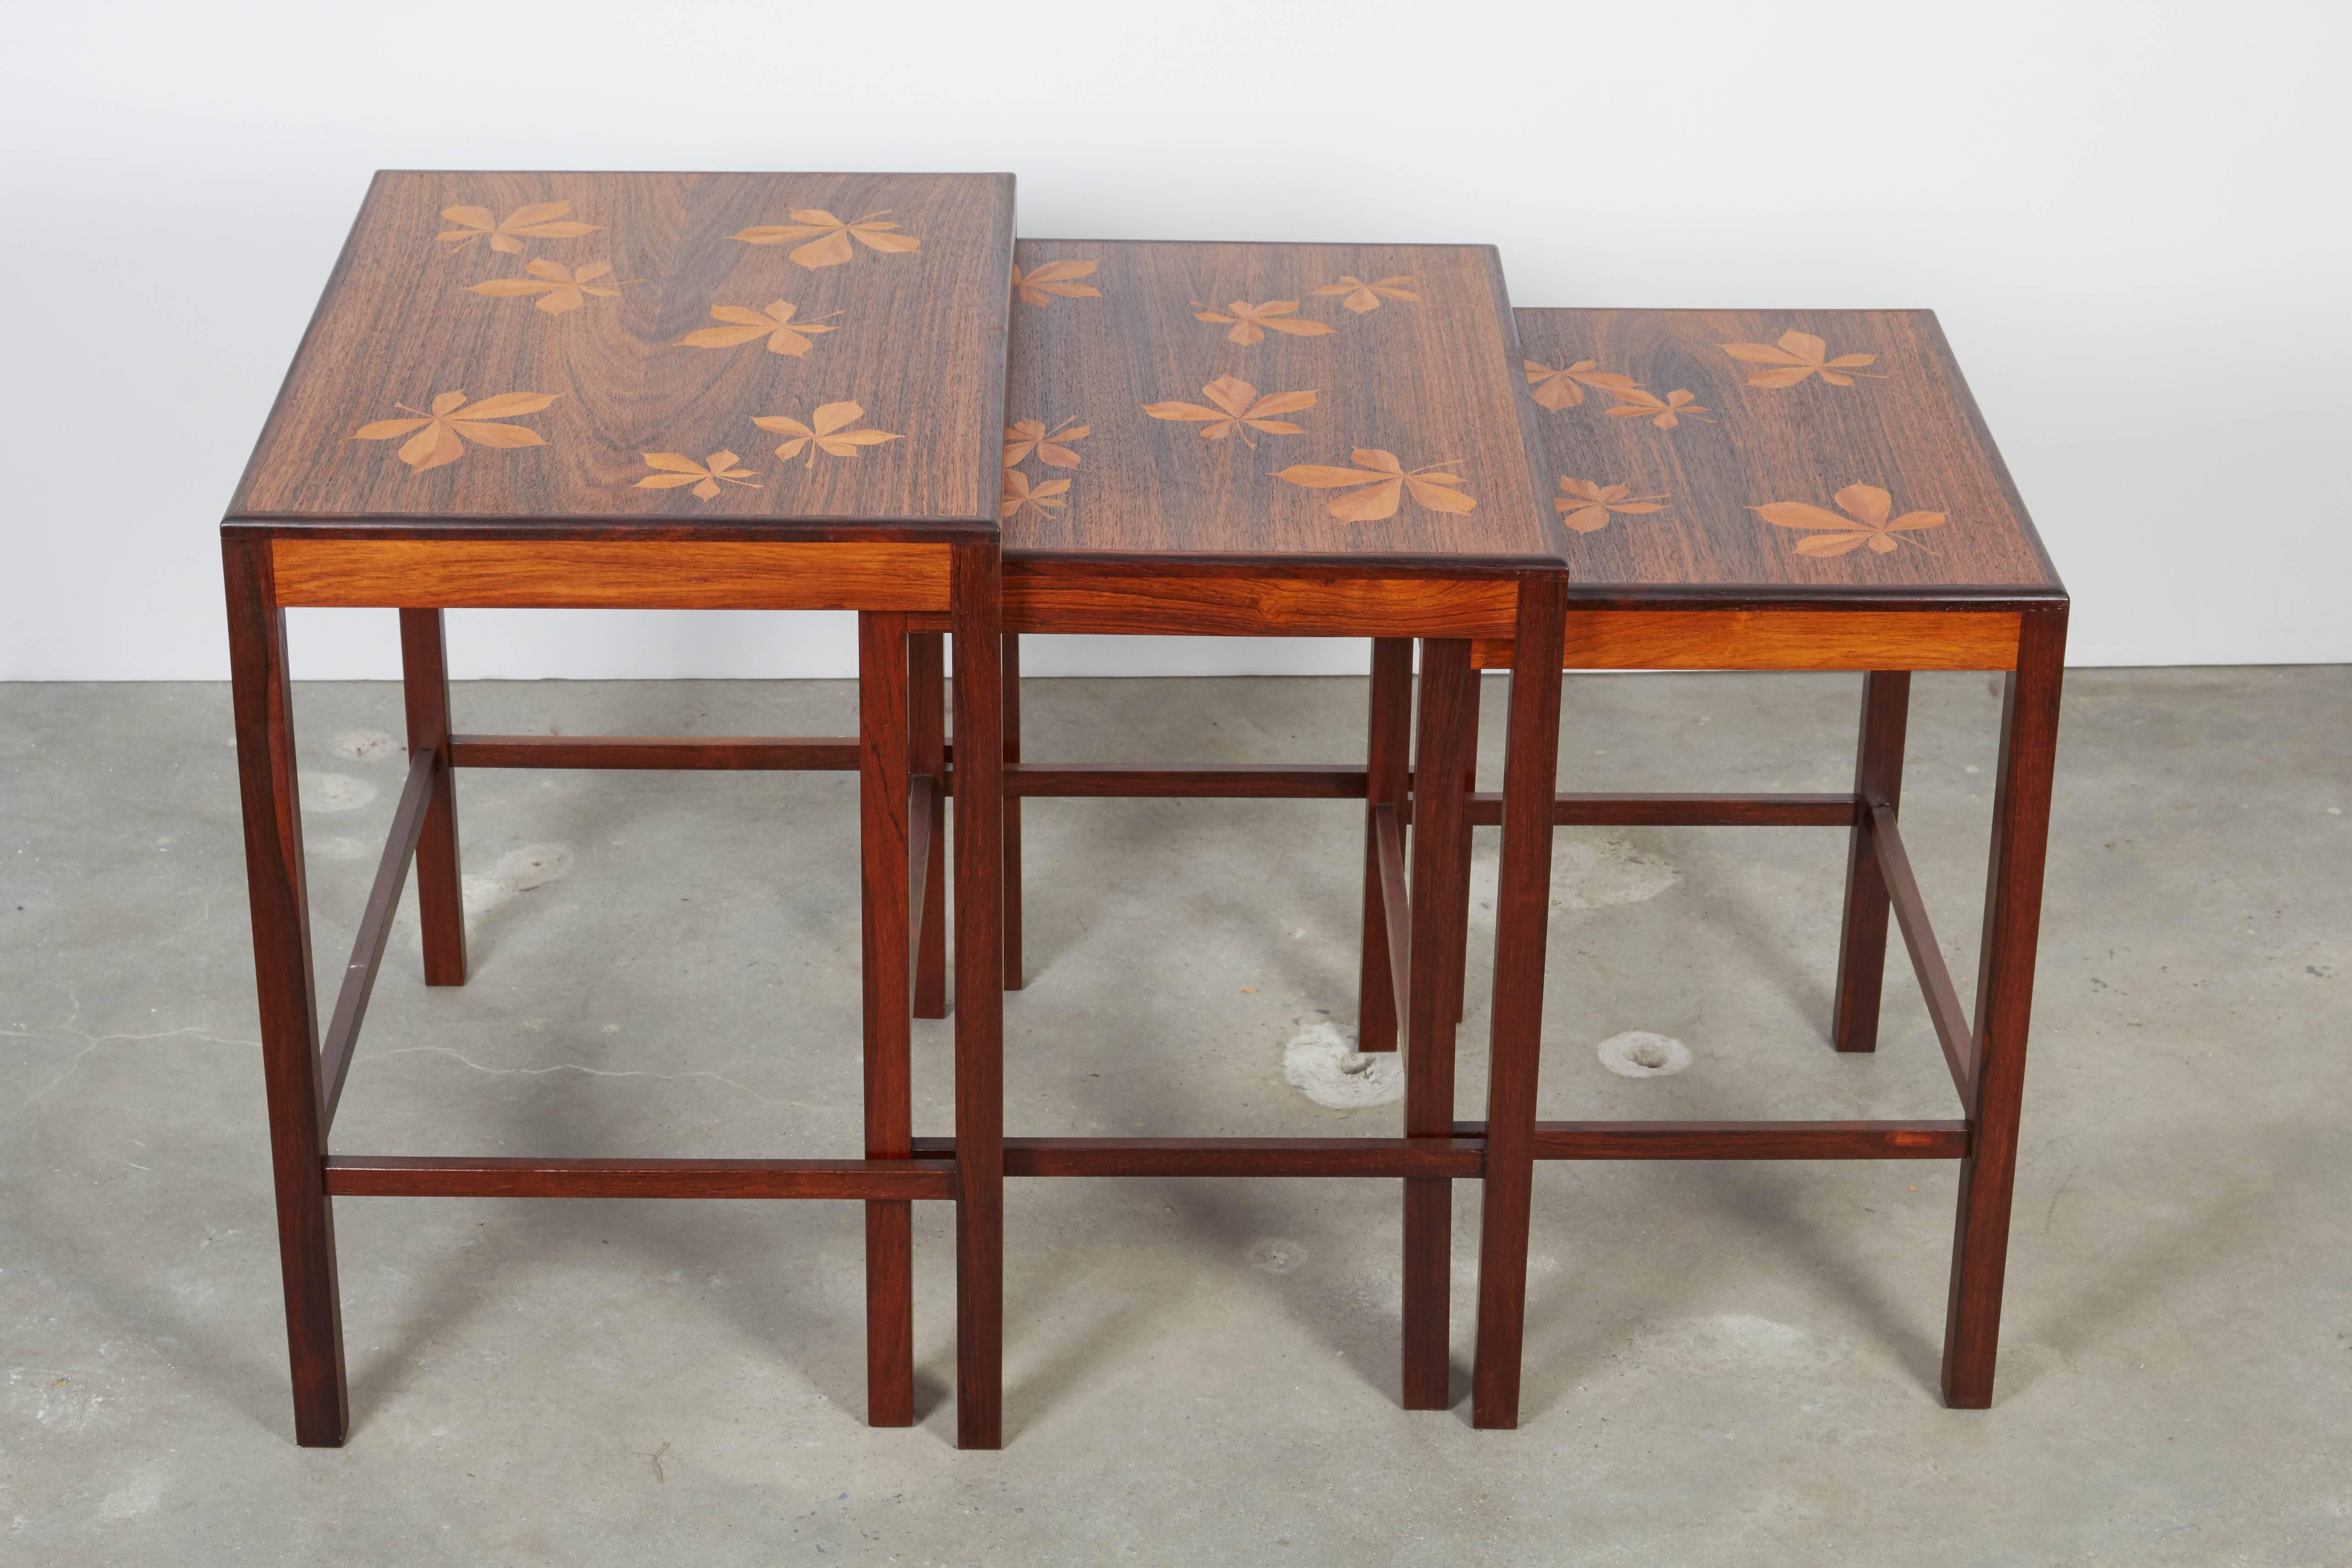 Scandinavian Modern Rosewood Nesting Tables with Chestnut Inlay